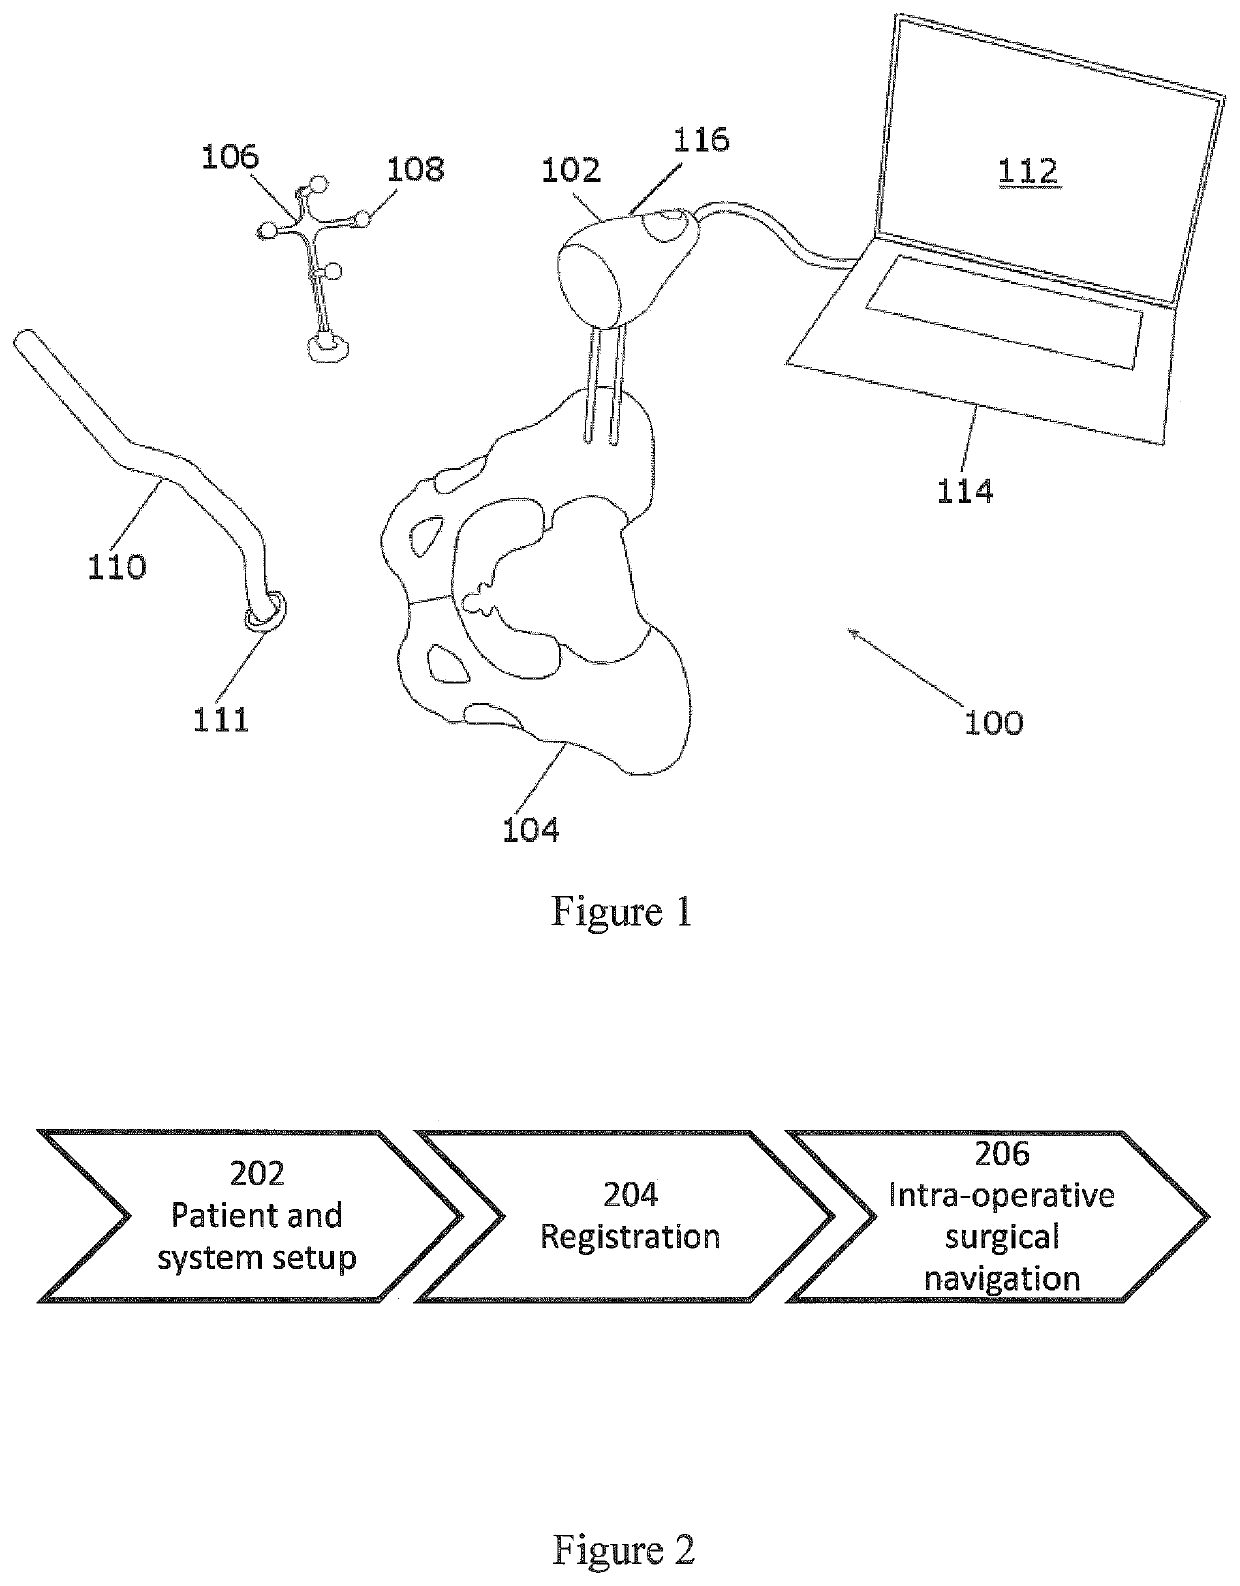 Systems, methods and devices for calculating hip center of rotation, adjusting parameters of joint replacement for pelvic tilt and calculating leg length and offset